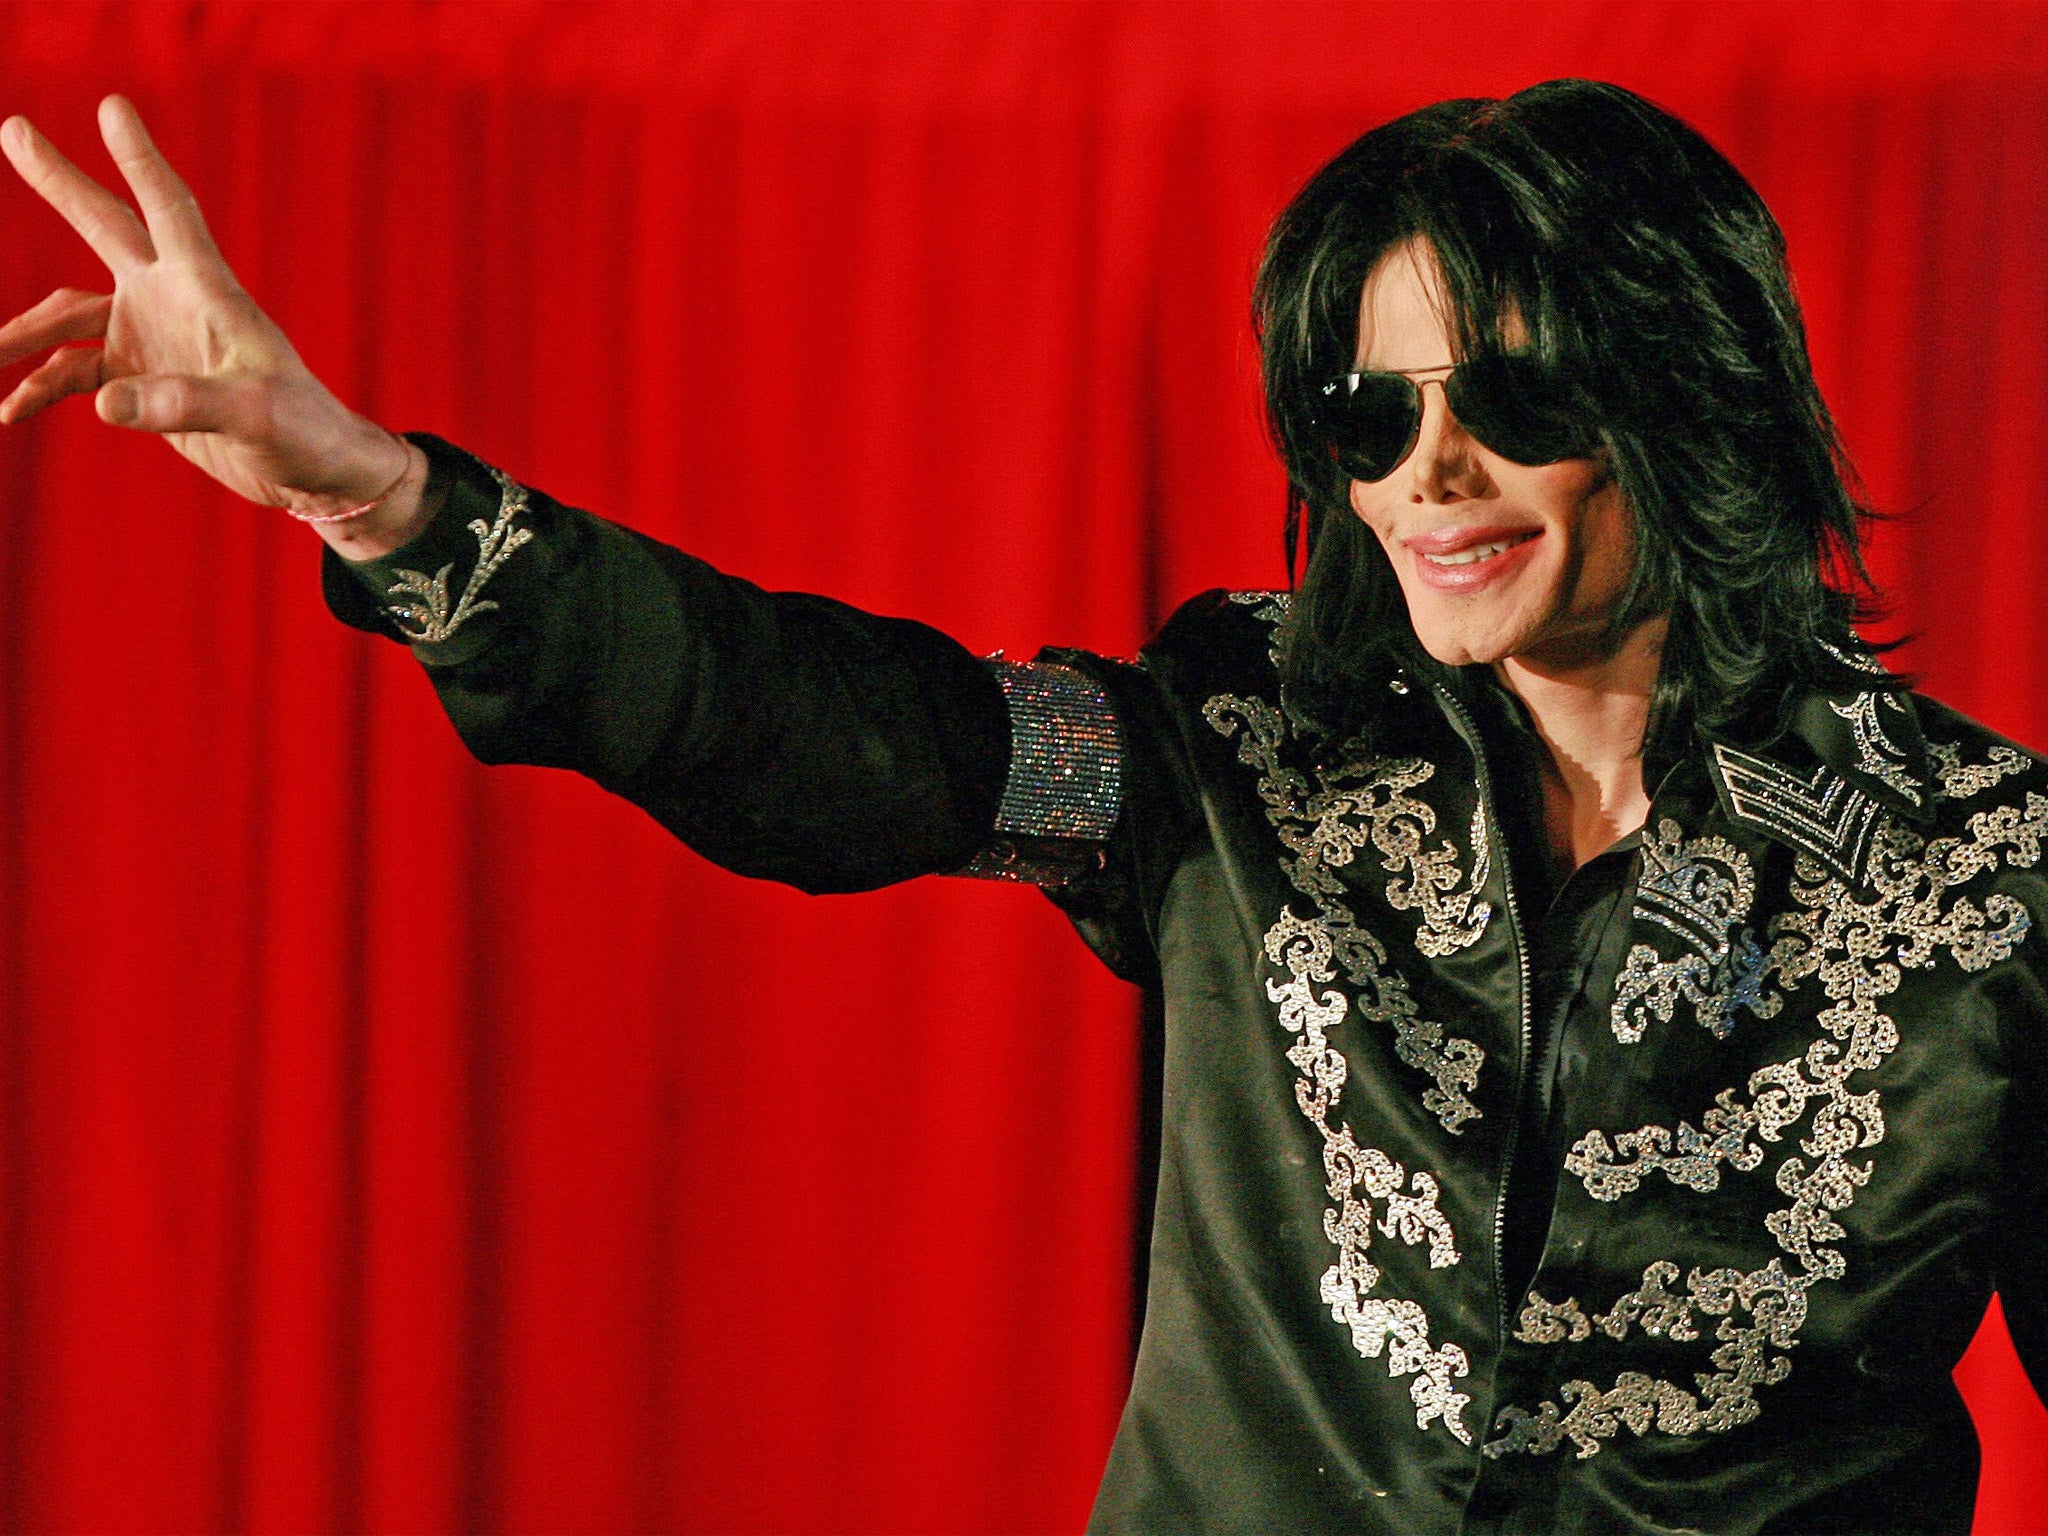 The 'King of Pop', Michael Jackson, died at the age of 50